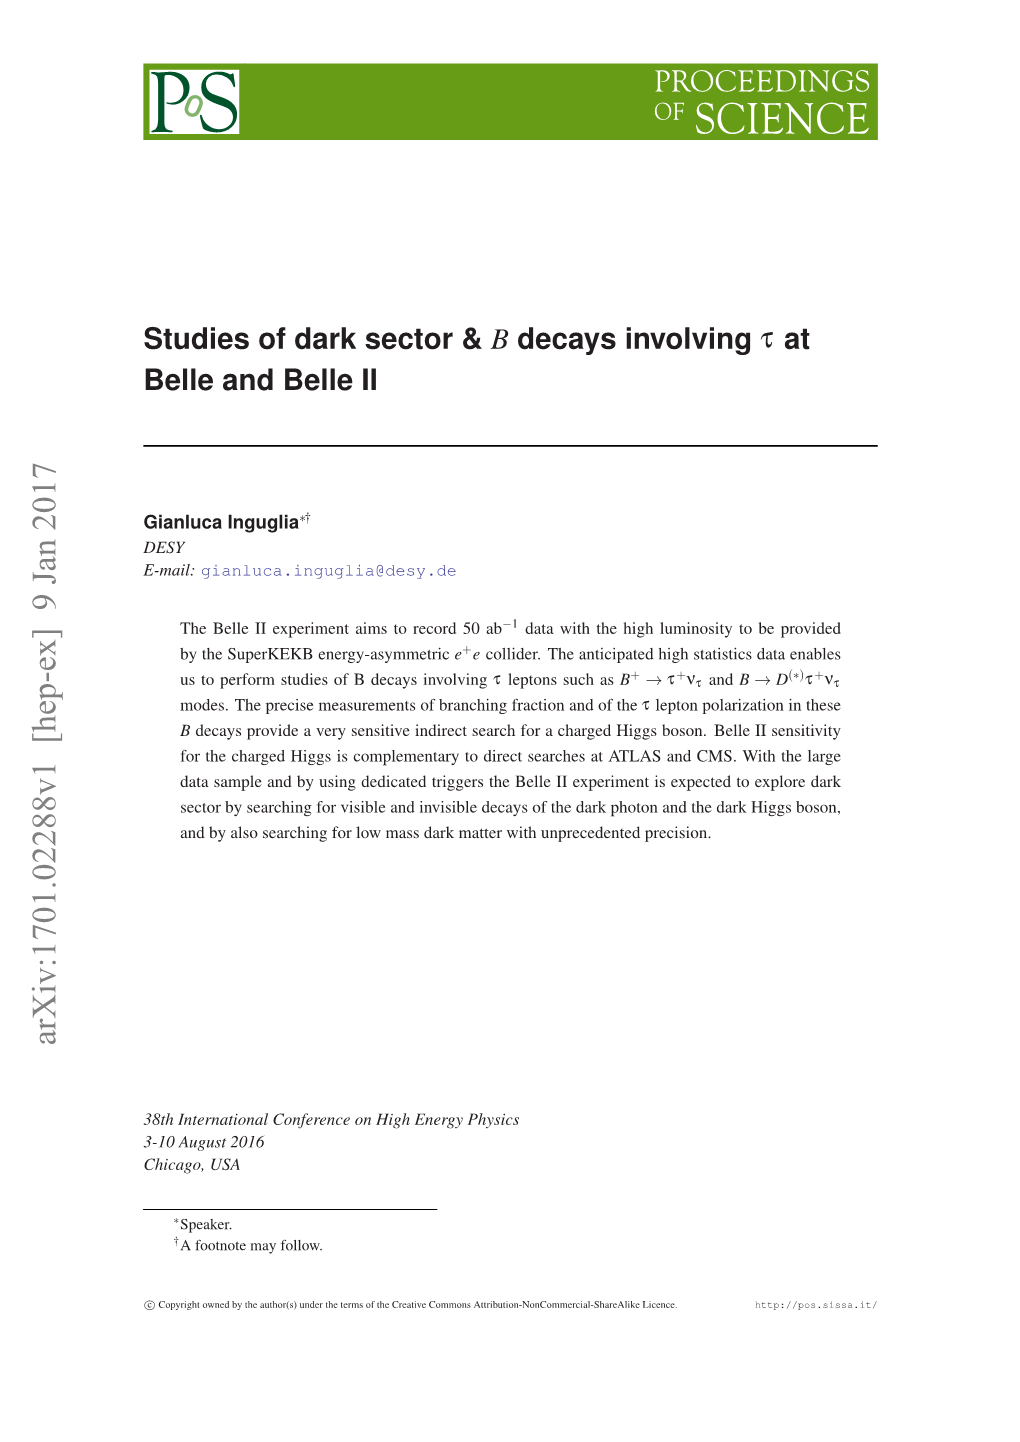 Studies of Dark Sector & B Decays Involving Τ at Belle and Belle II